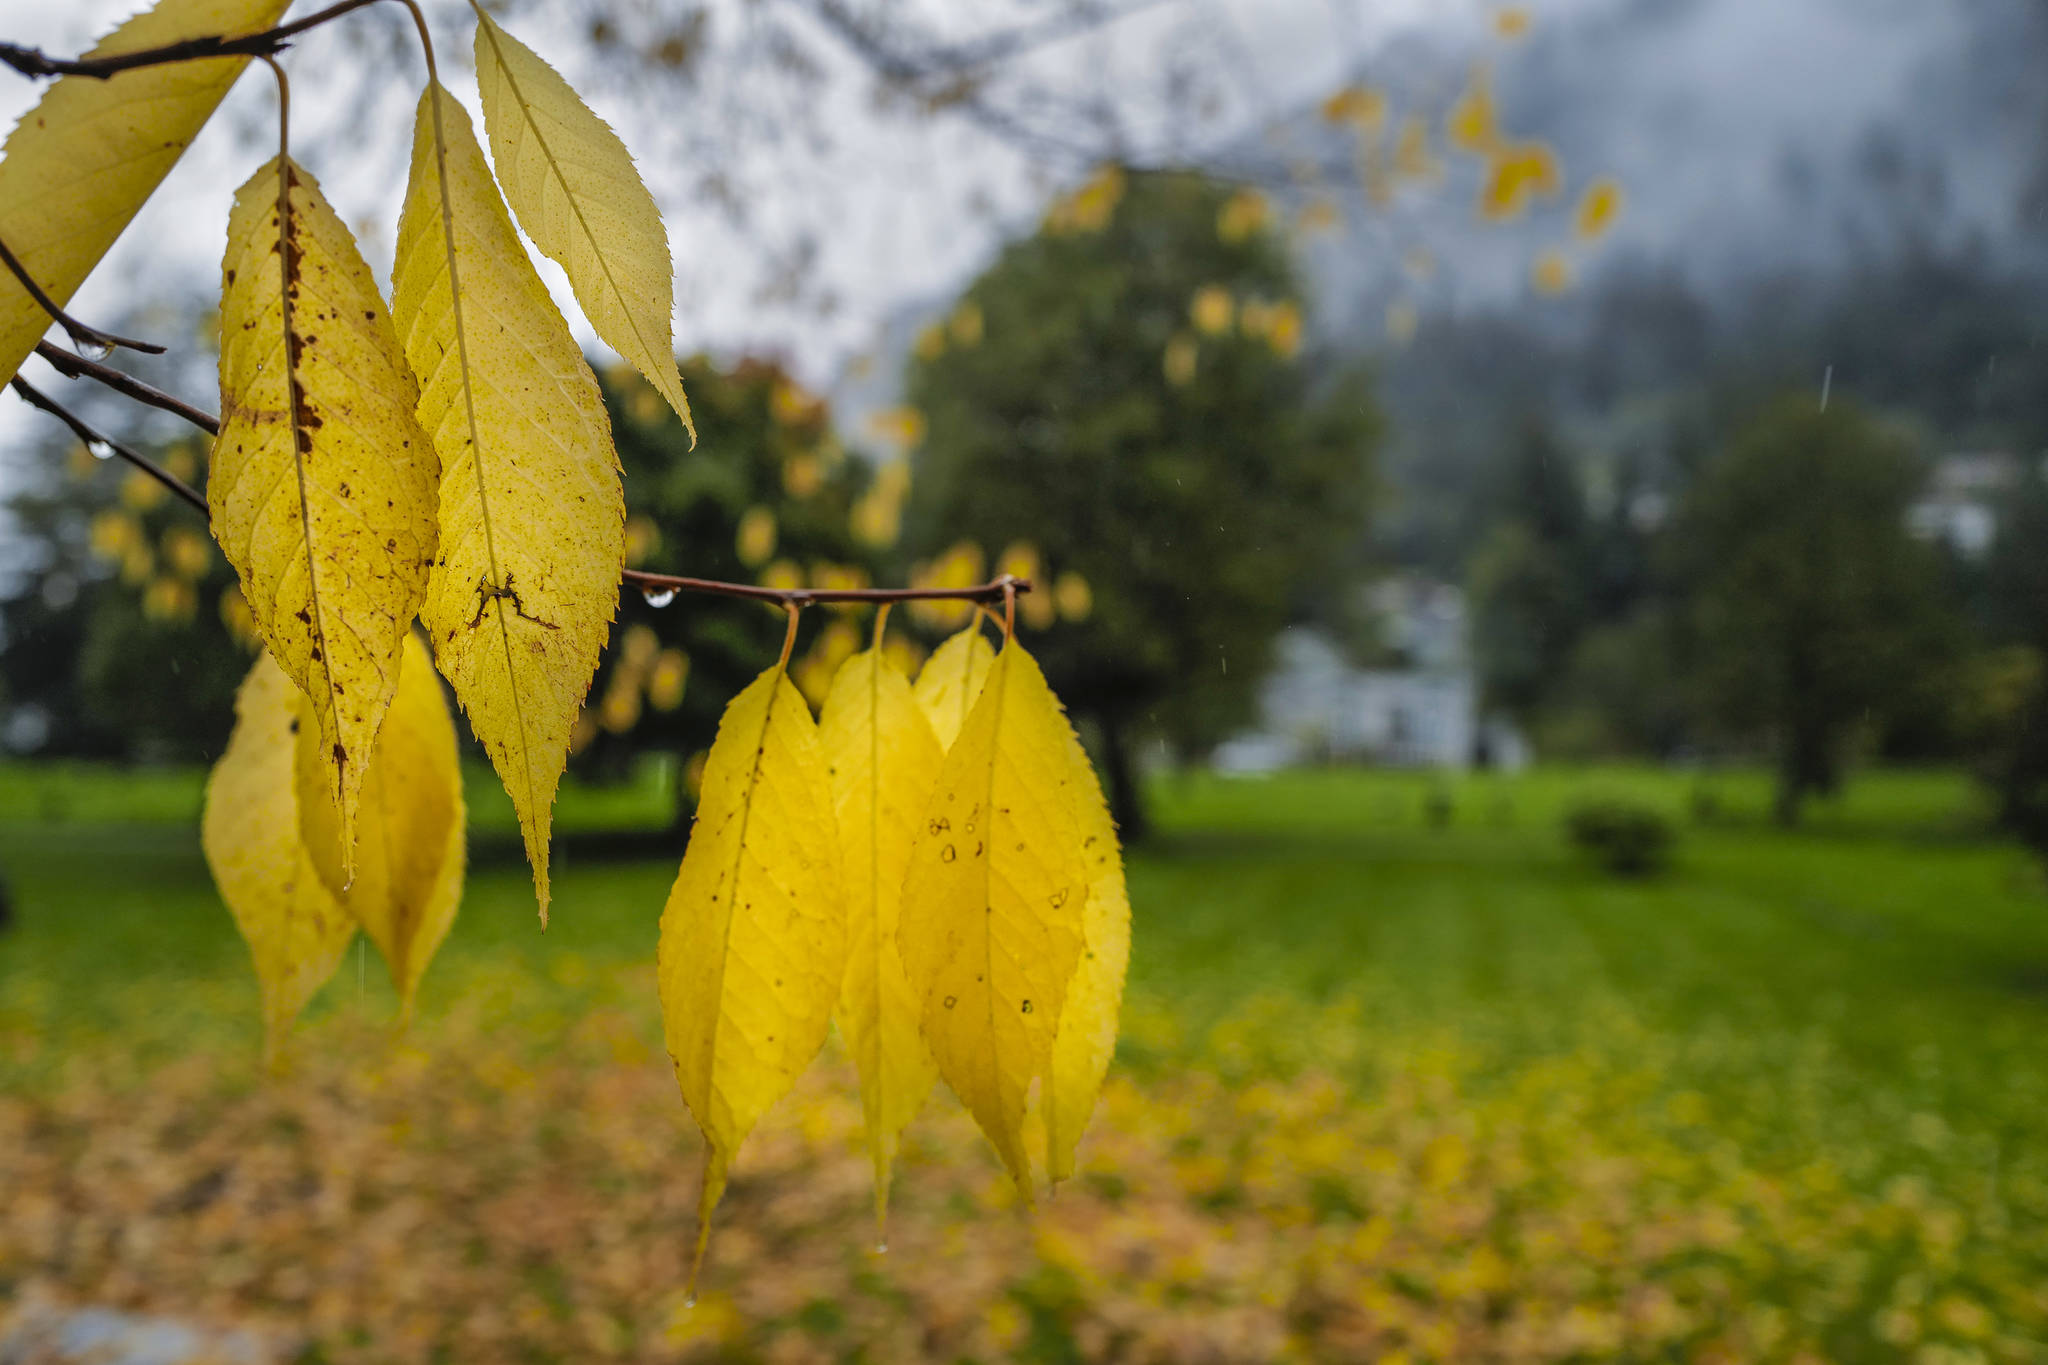 A change in season is marked by tree leaves turning color at Evergreen Cemetery on Tuesday, Sept. 24, 2019. (Michael Penn | Juneau Empire)